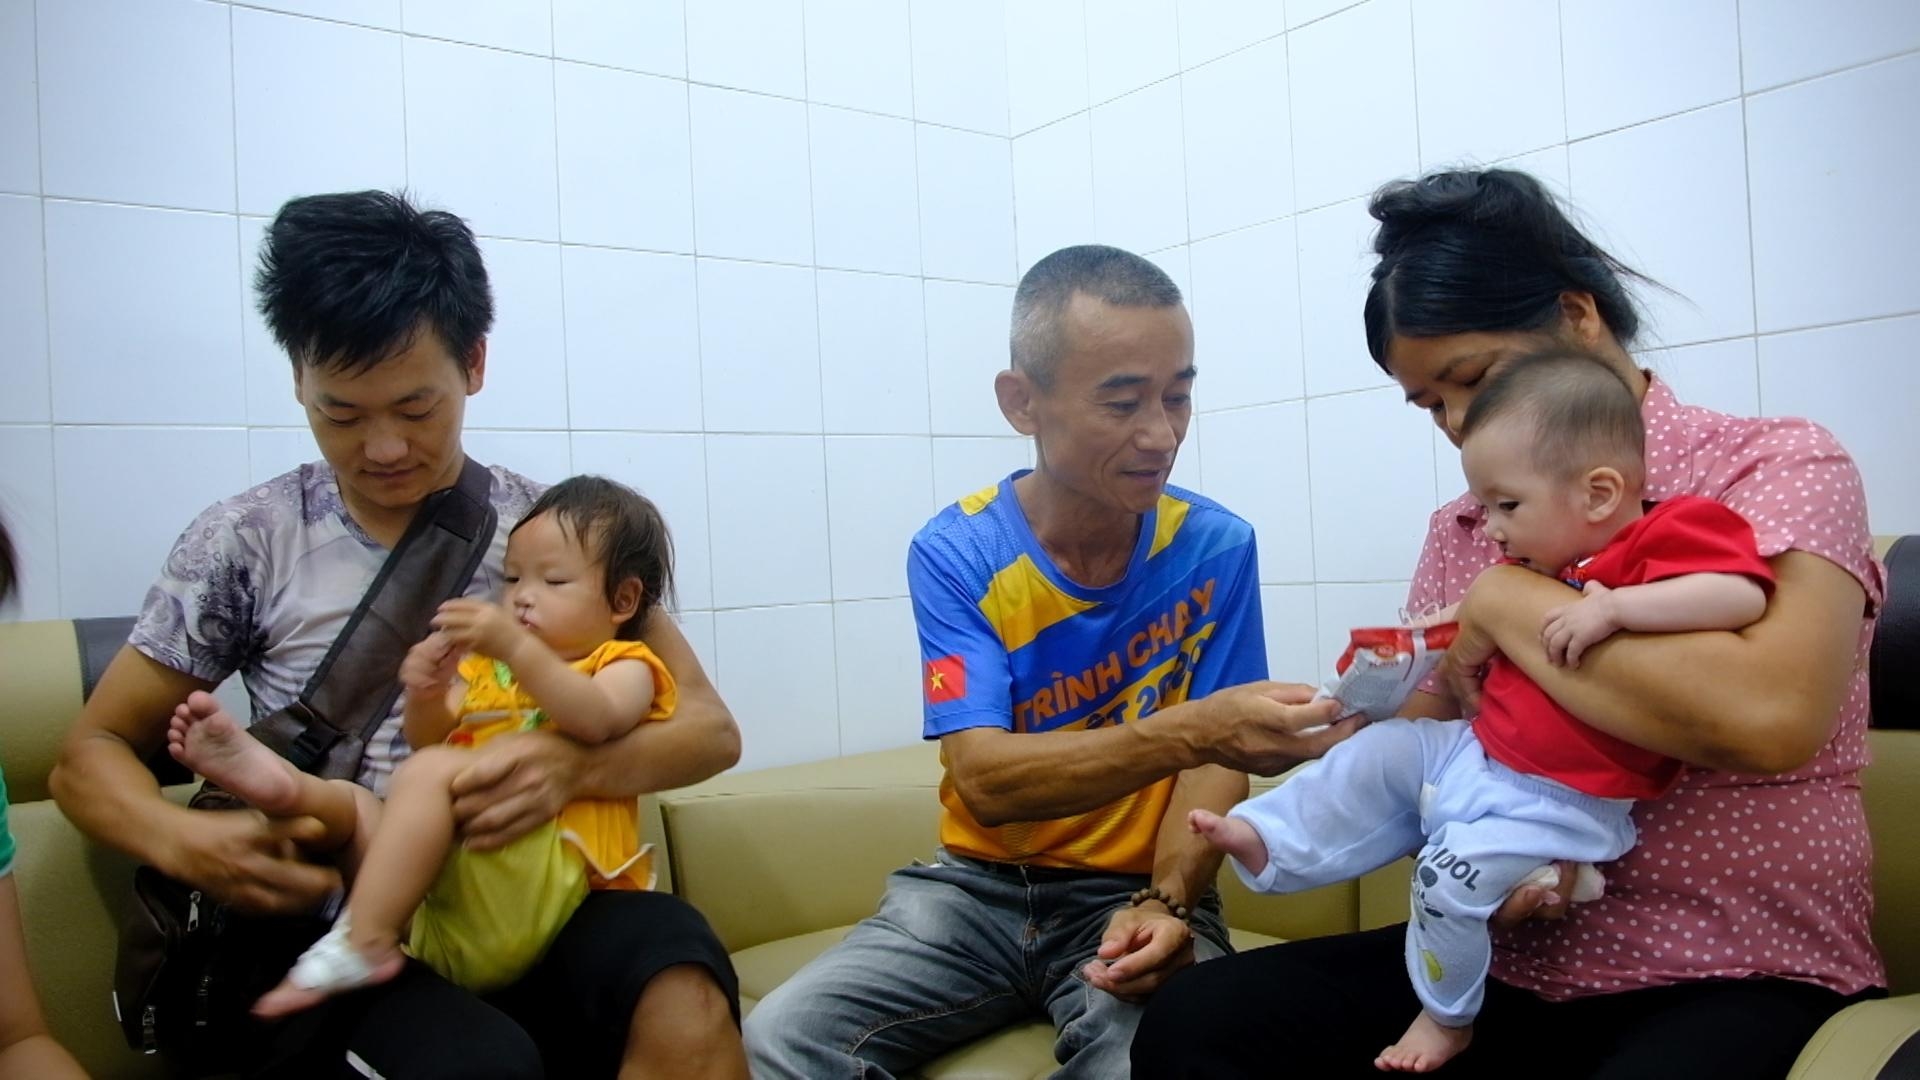 Operation Smile's first provincial medical mission of 2020 to begin this week in Thai Nguyen